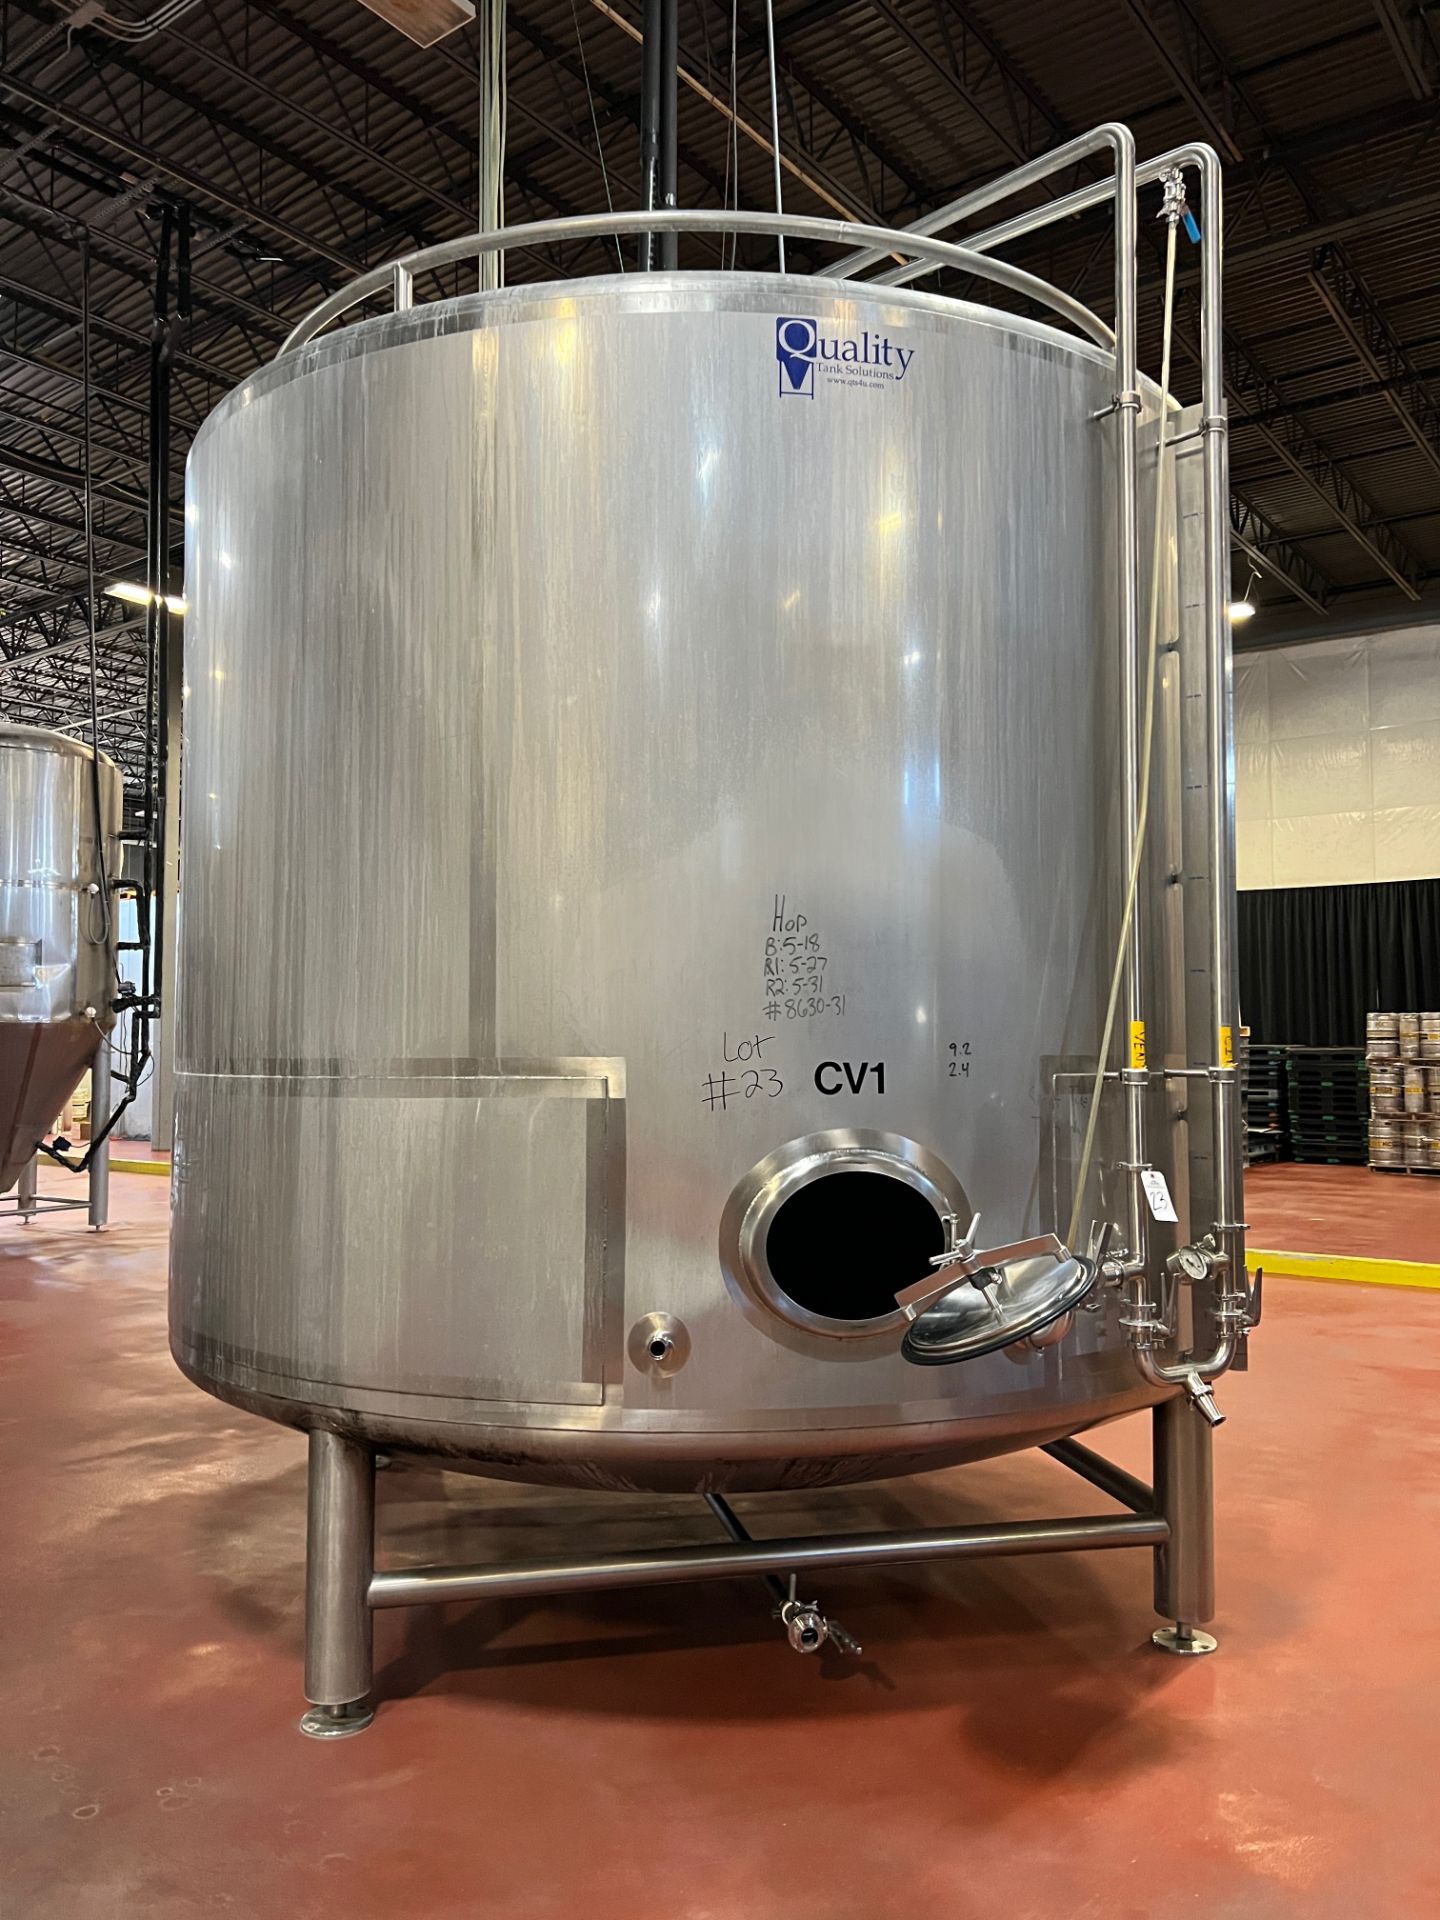 Quality Tank 200 BBL Stainless Steel Holding Tank, Glycol Jacketed, Rounded Bottom, | Rig Fee $3000